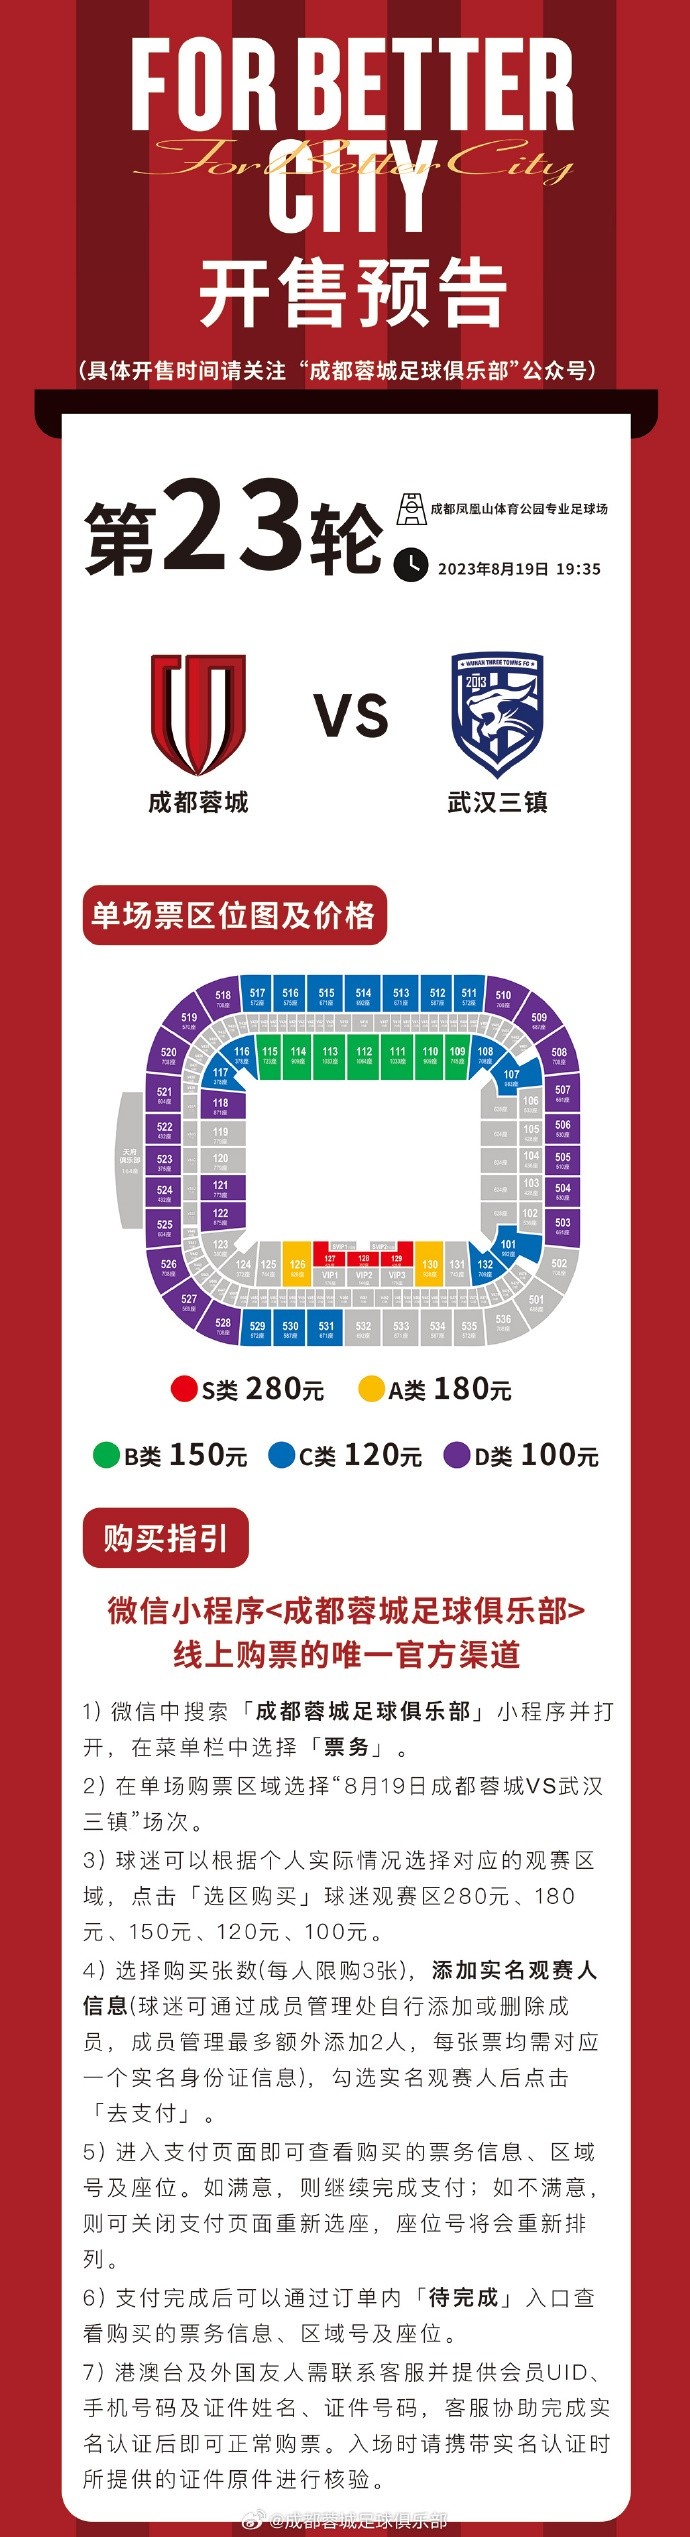 At 19:35 on the evening of August 19, Chengdu Rongcheng will welcome the only home game in August in Phoenix Mountain.